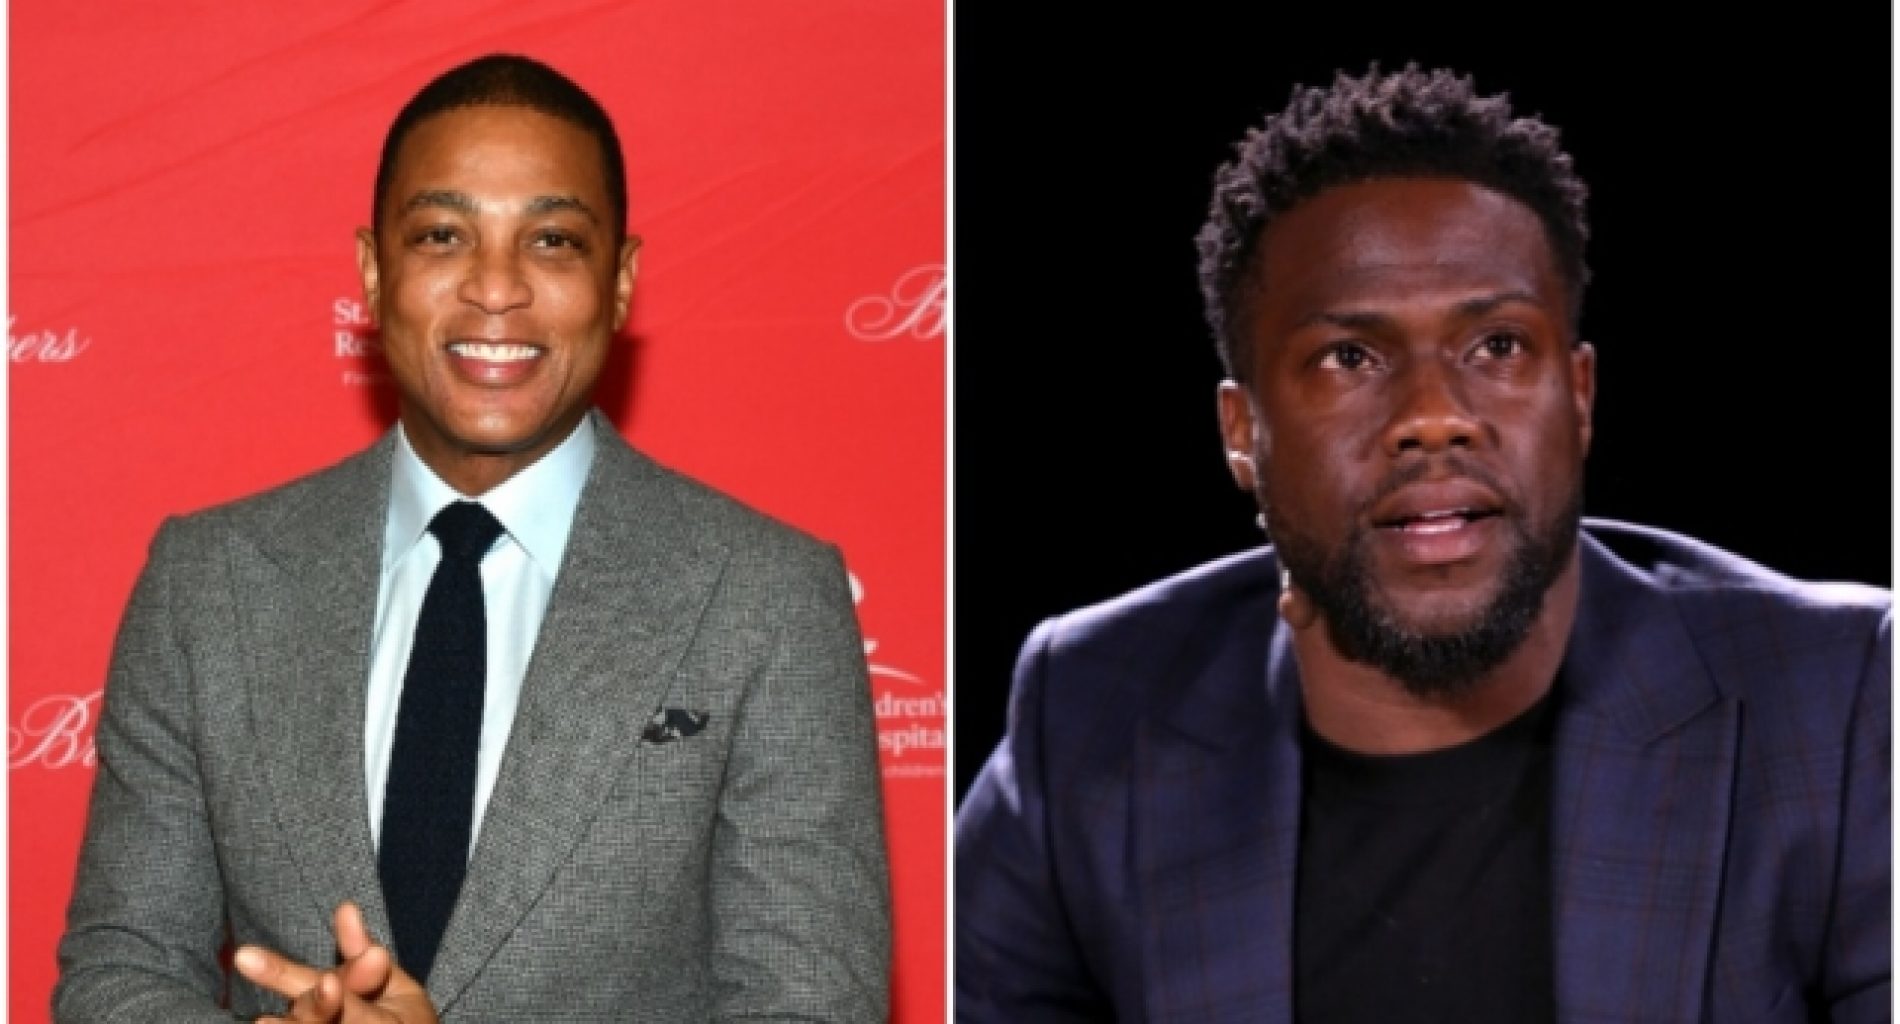 Kevin Hart responds to Don Lemon’s comments regarding his Oscar controversy